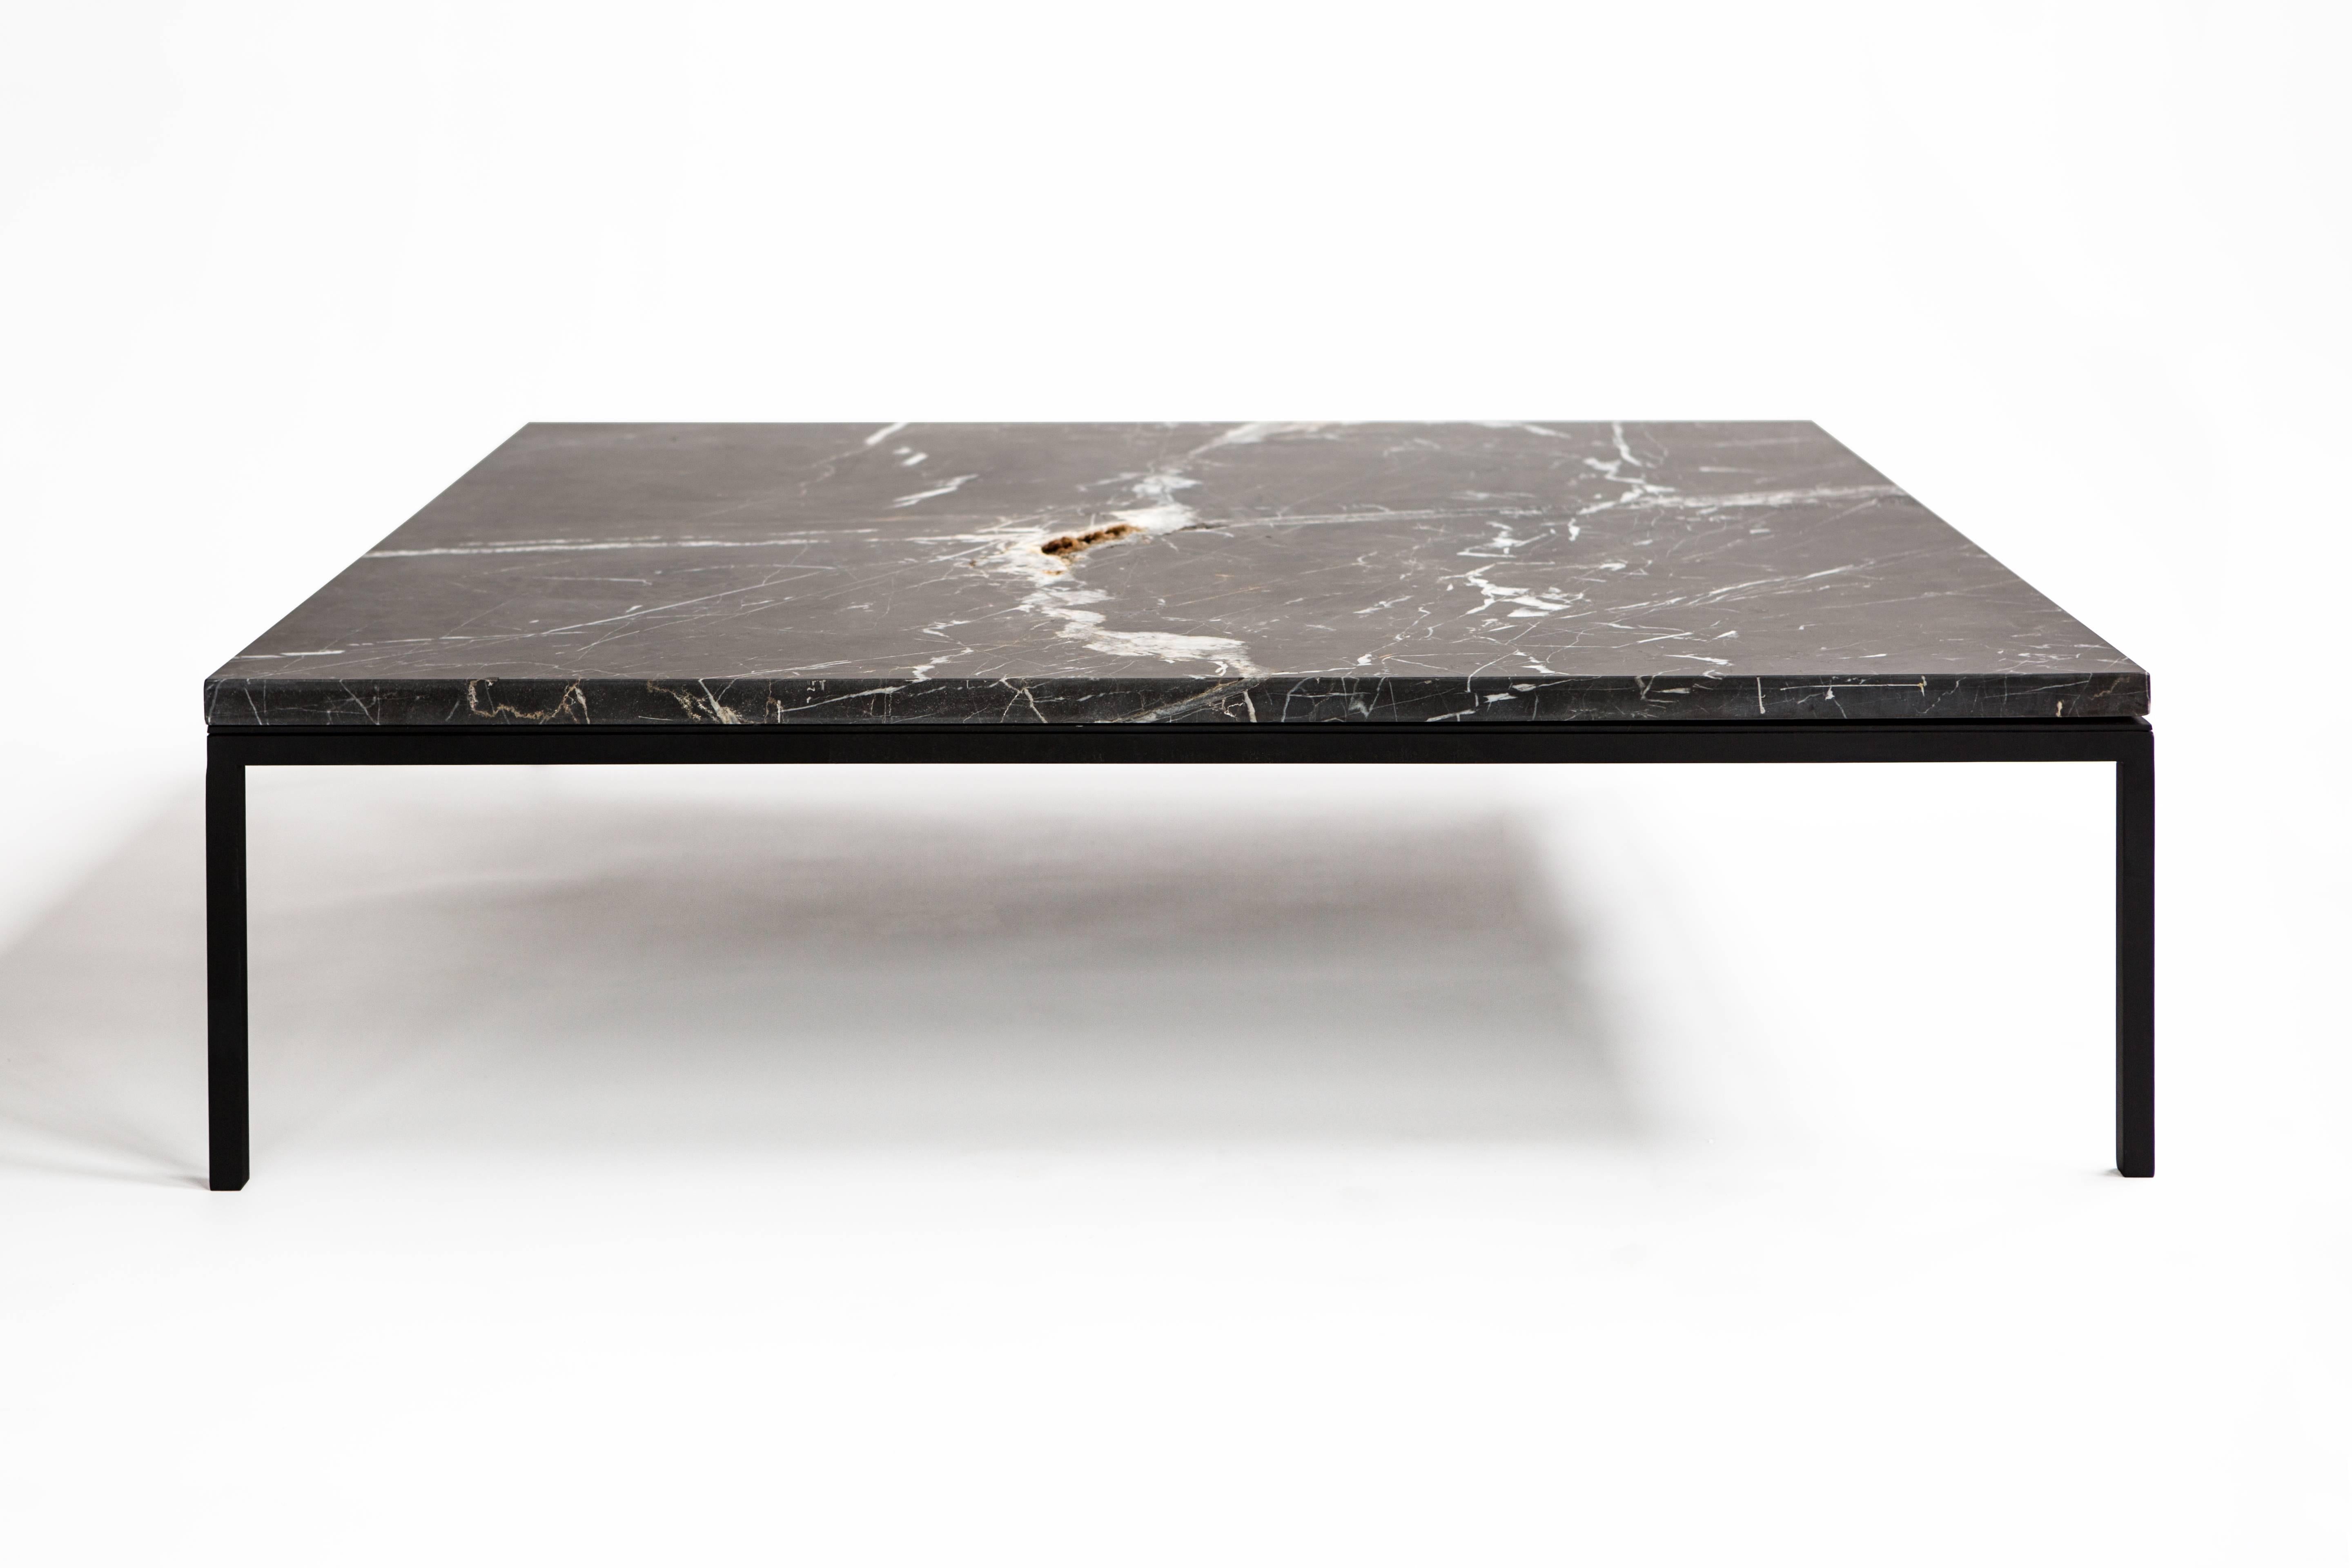 This unique coffee table is a part of the Found collection of one-of-a-kind functional art pieces. This Minimalist and elegant piece is a combination of organic and geometric. It features a single slab of black marble that was hand-picked at a